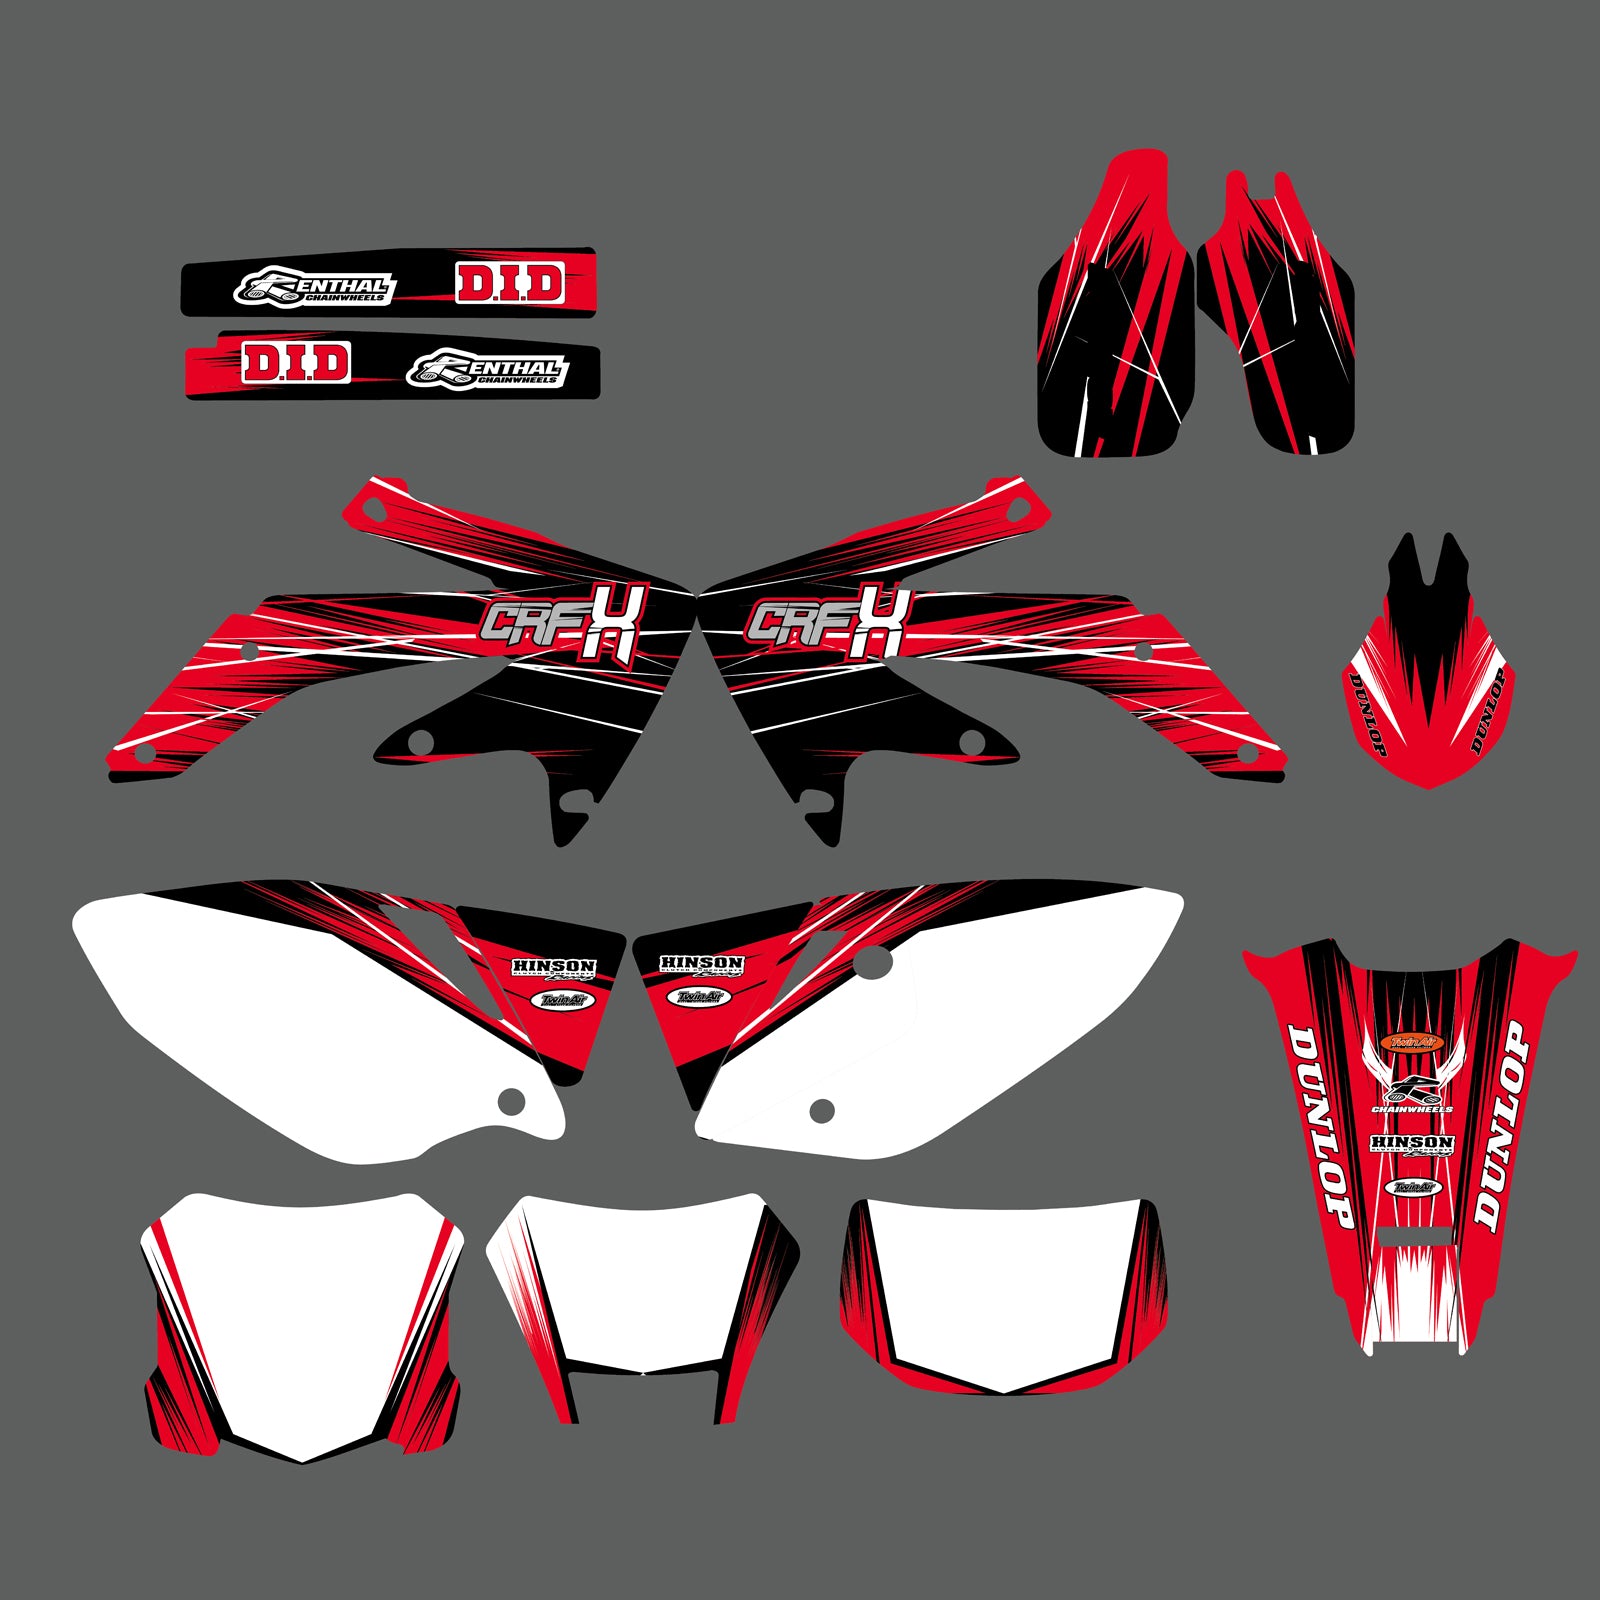 Team Graphics Decals Stickers Kit For Honda CRF450X 2005-2016